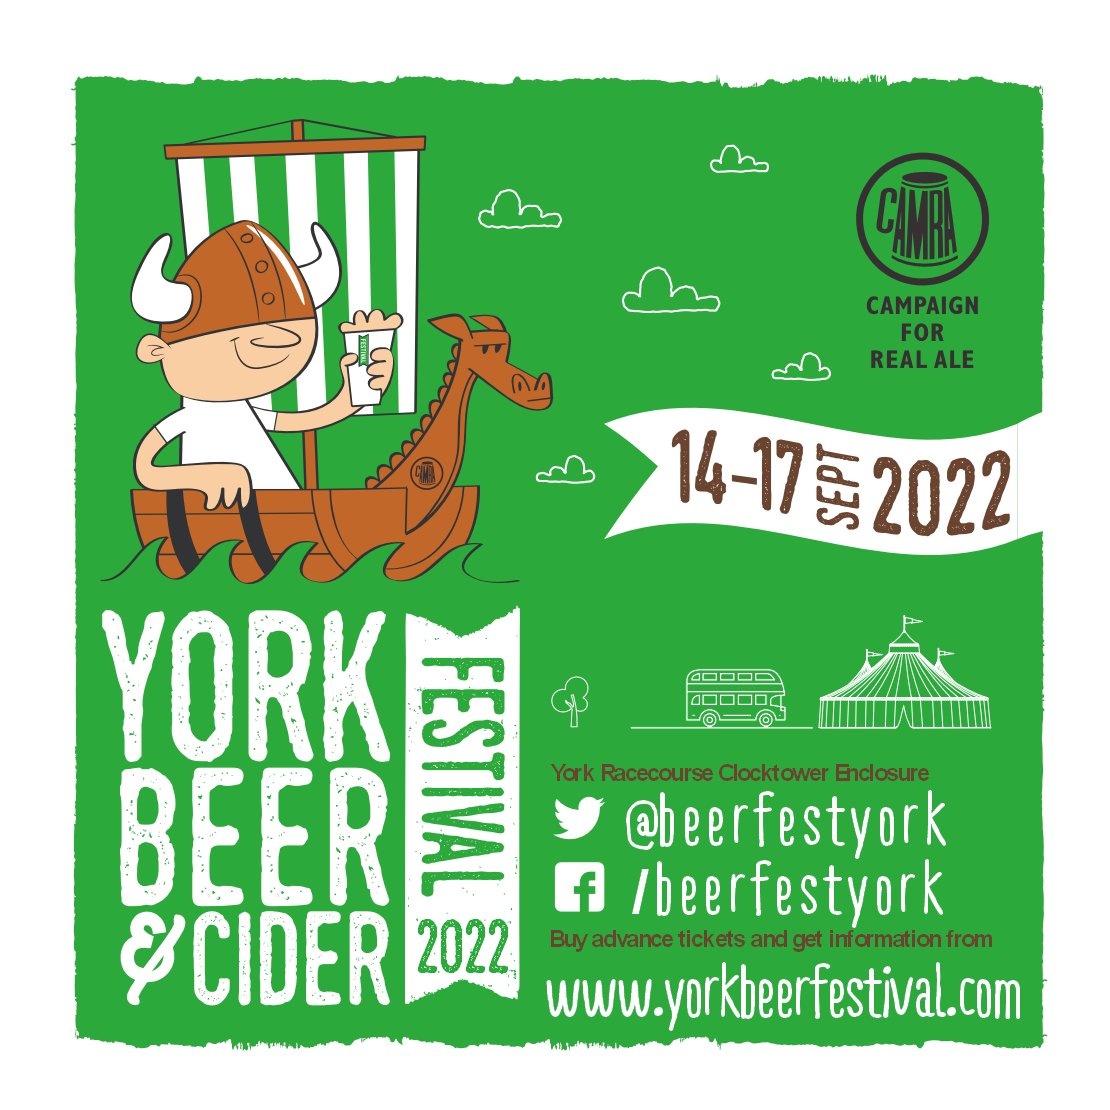 Less than 2 weeks until Yorkshire's biggest beer festival returns to York Knavesmire - find out all about it and get advance tickets for FastTrack entry here: yorkbeerfestival.com